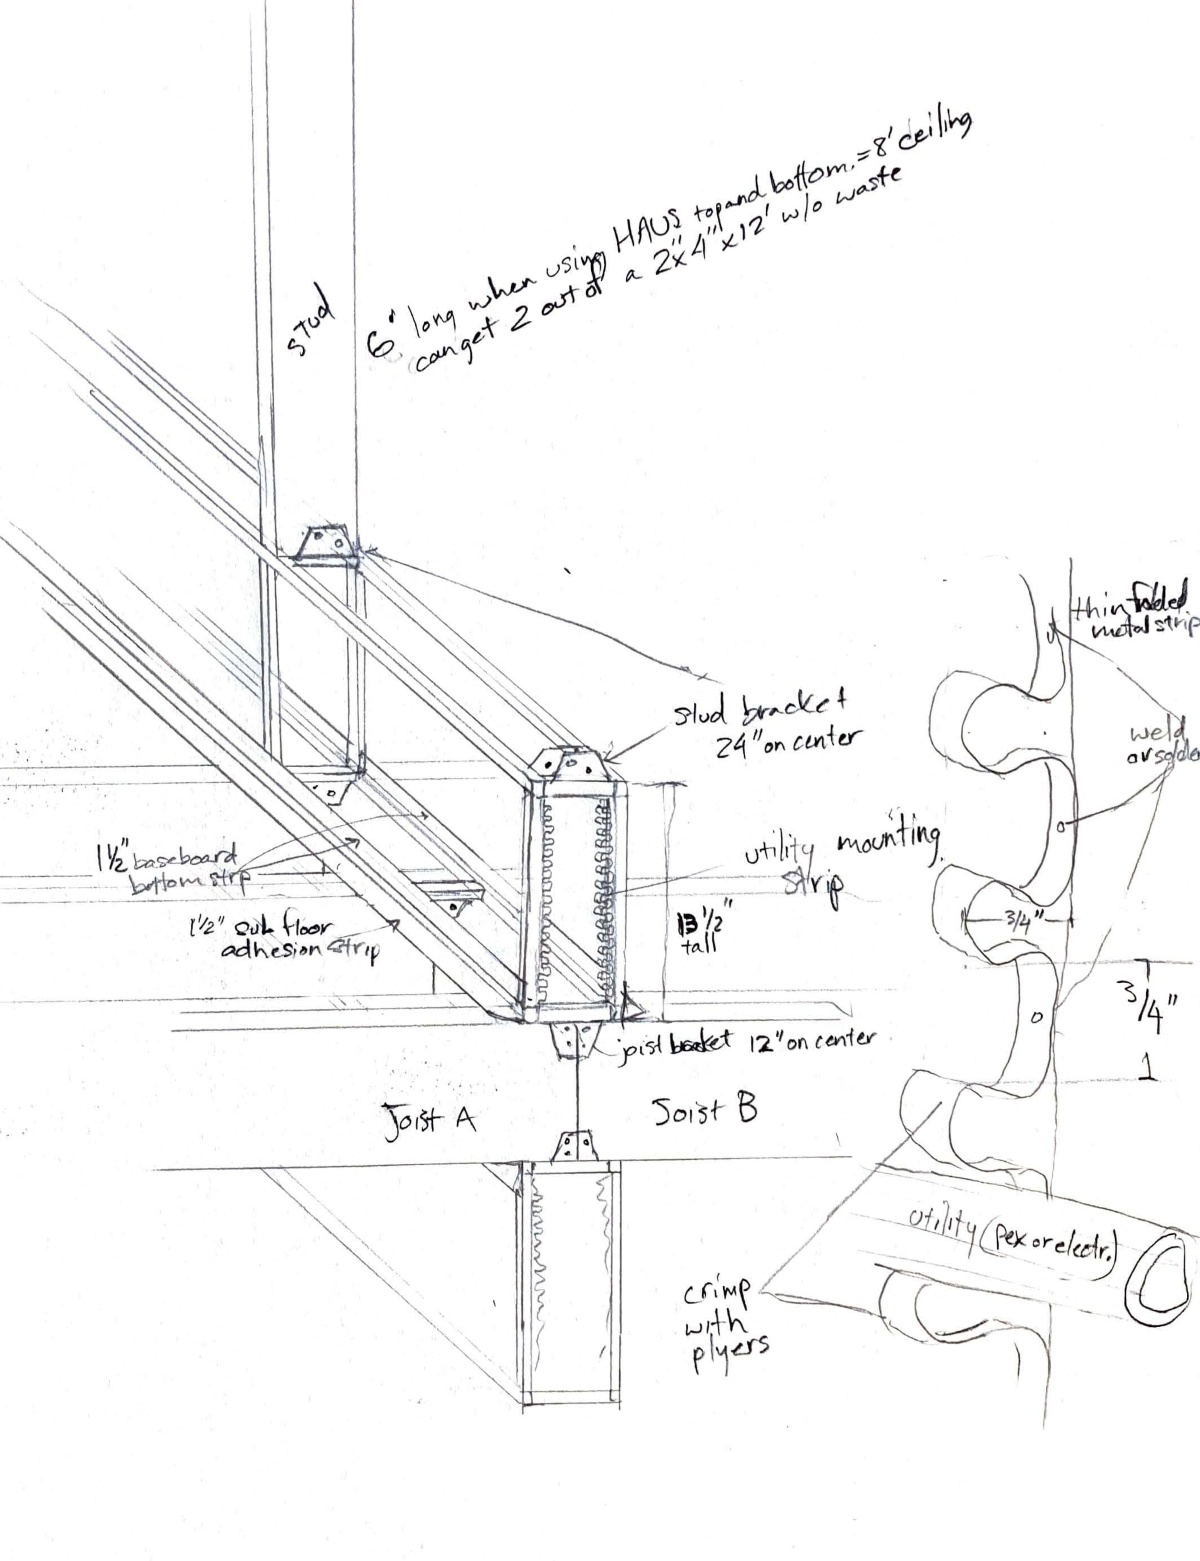 A black and white sketch of the Home Access Utility System.